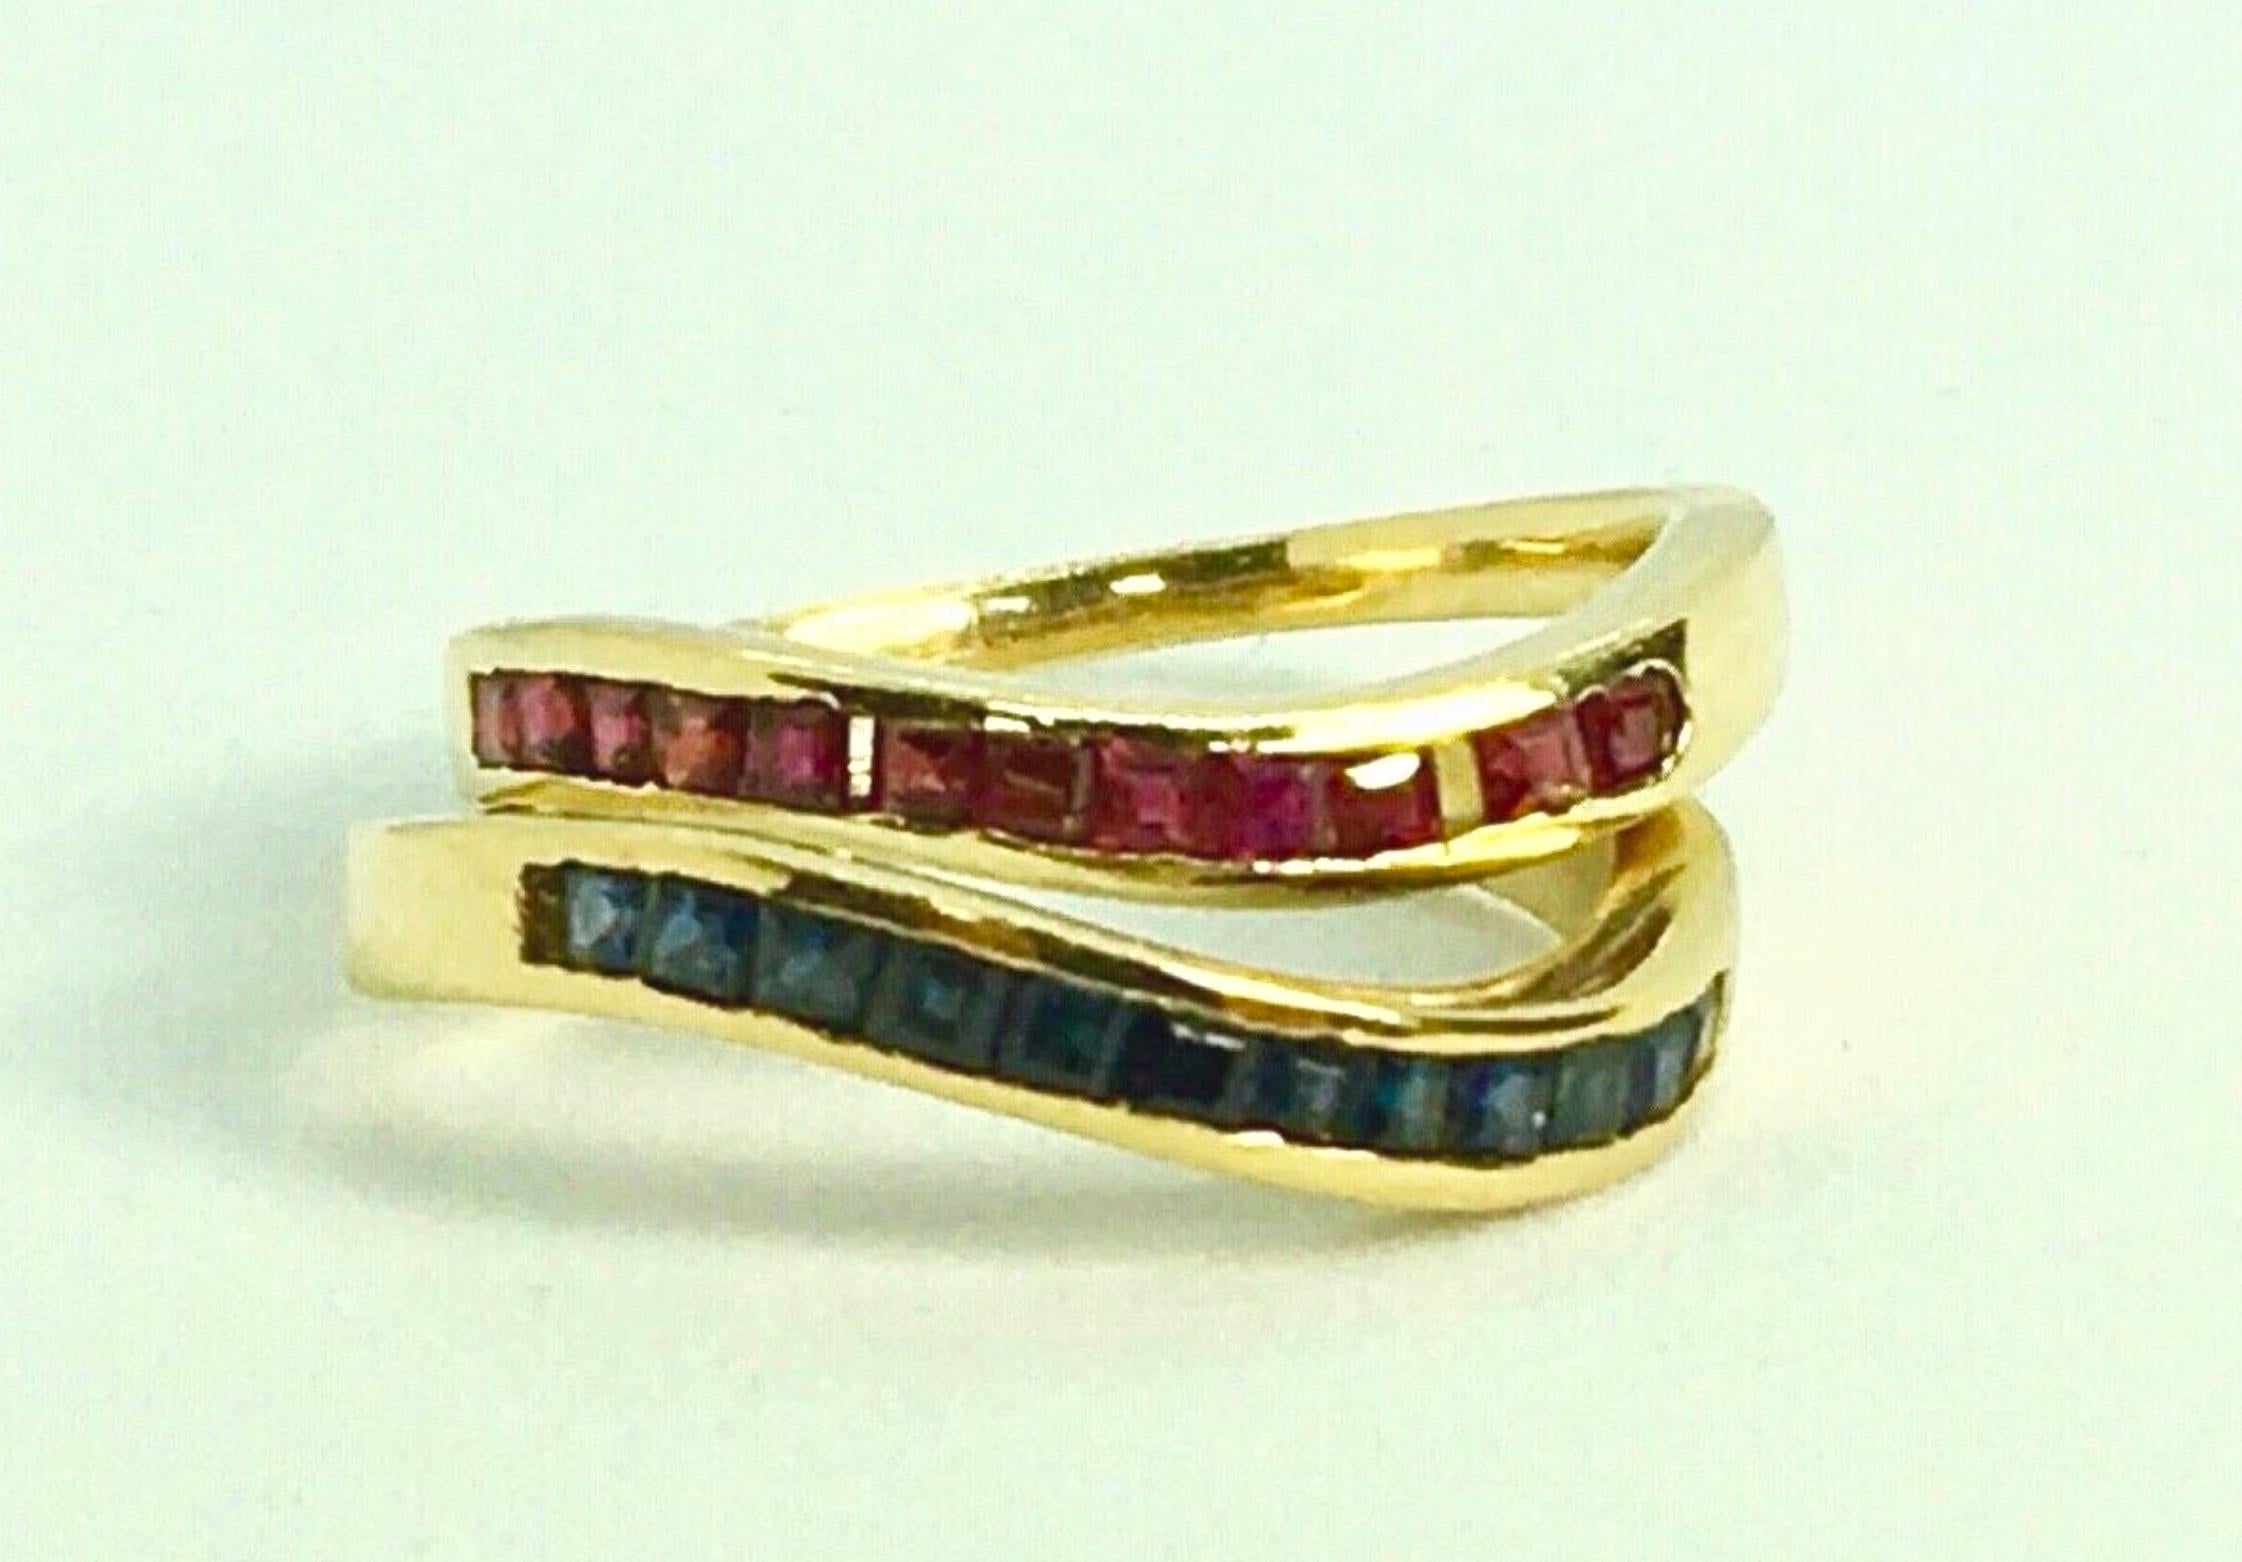 Half Way  Ruby & Sapphire Eternity Band  Ring
Mounting Is Custom Made Solid Yellow Gold 18K
Each Band Ring 0.50 Carats of Natural Gemstone (Sapphire /  Ruby)
Set Weight   5.1g
Ring Size 6
Excellent / Estate-Condition